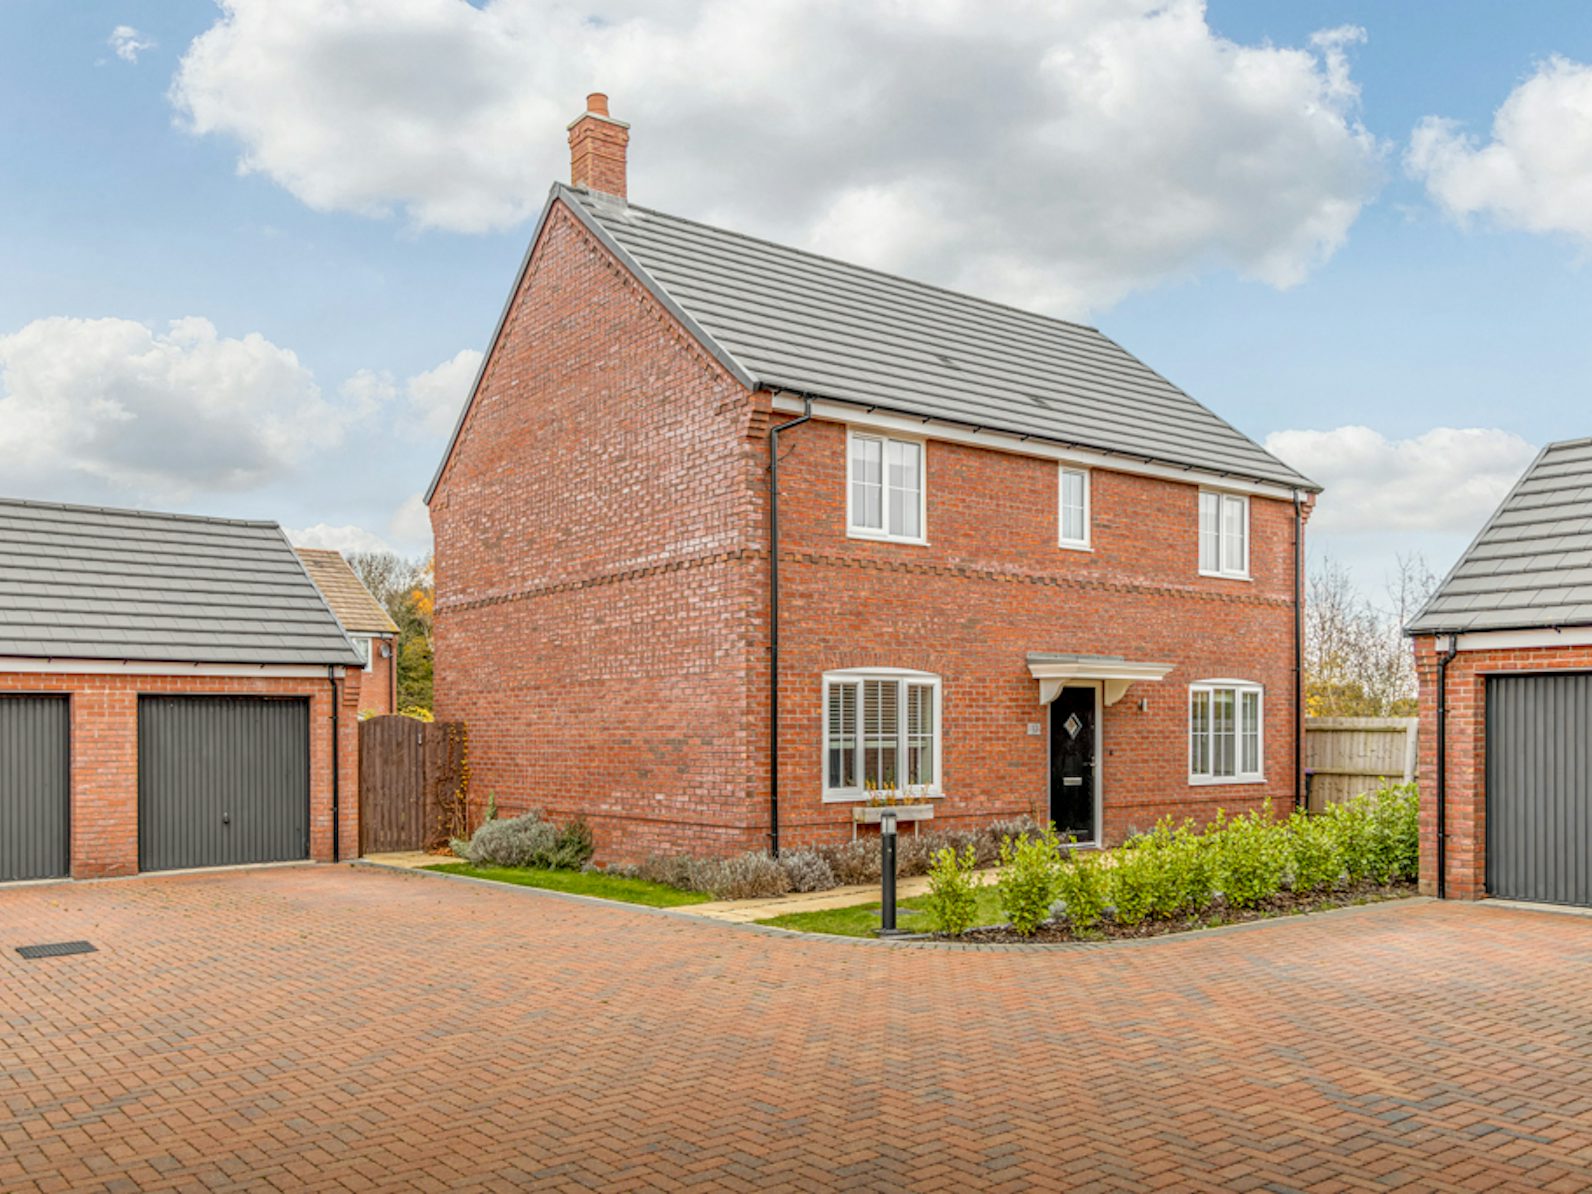 Detached House for sale on Meres Way Swineshead, PE20